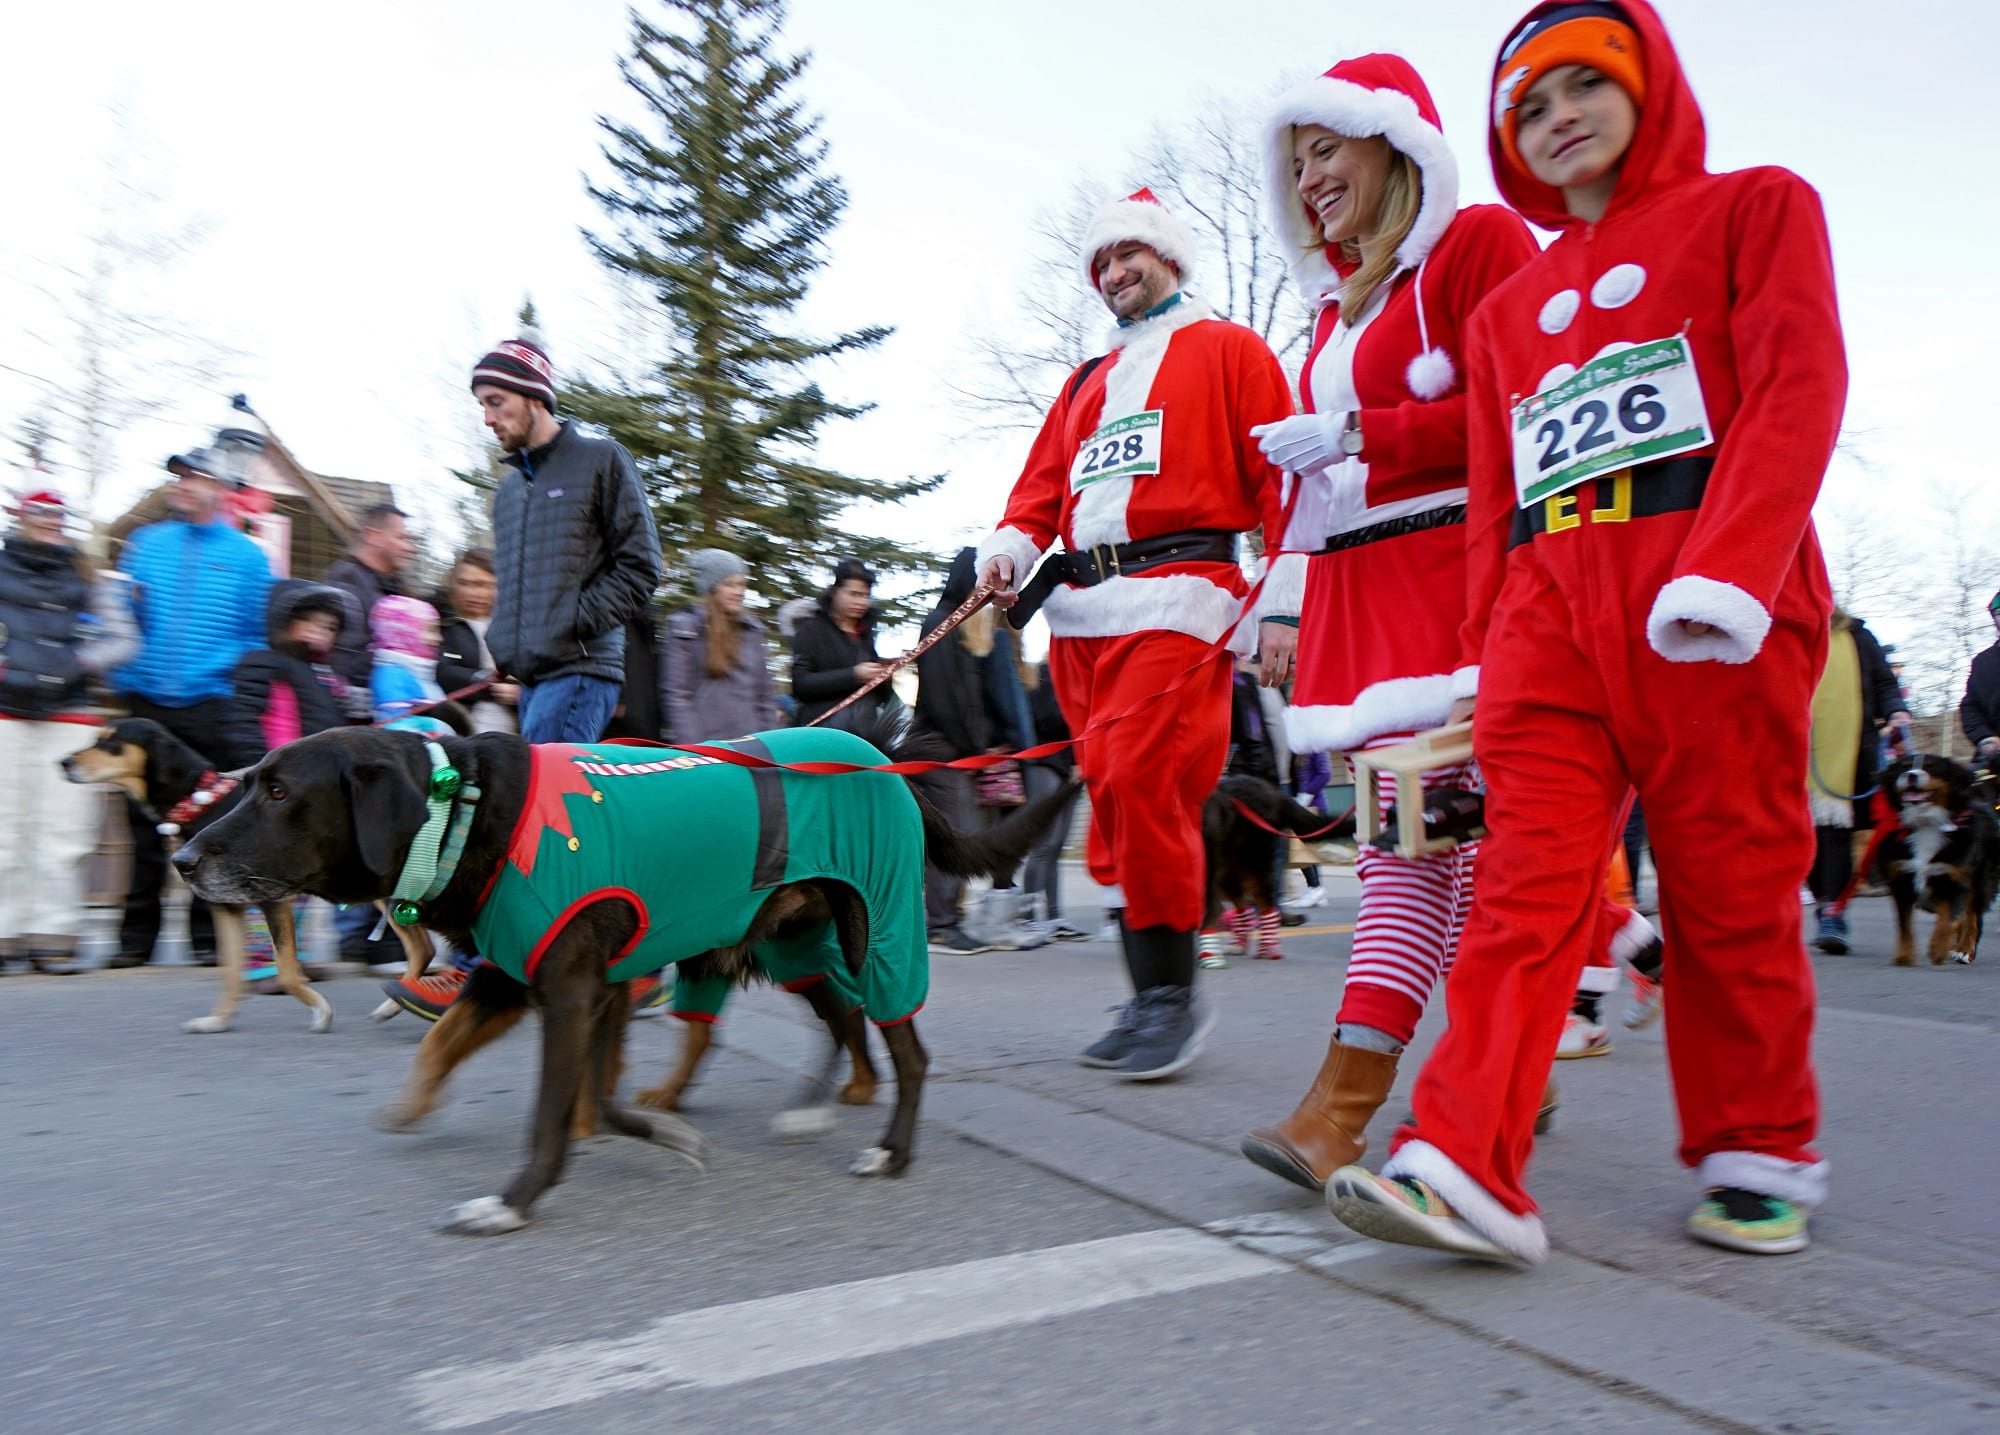 Walkers in costume with their dog during the Race of the Santas